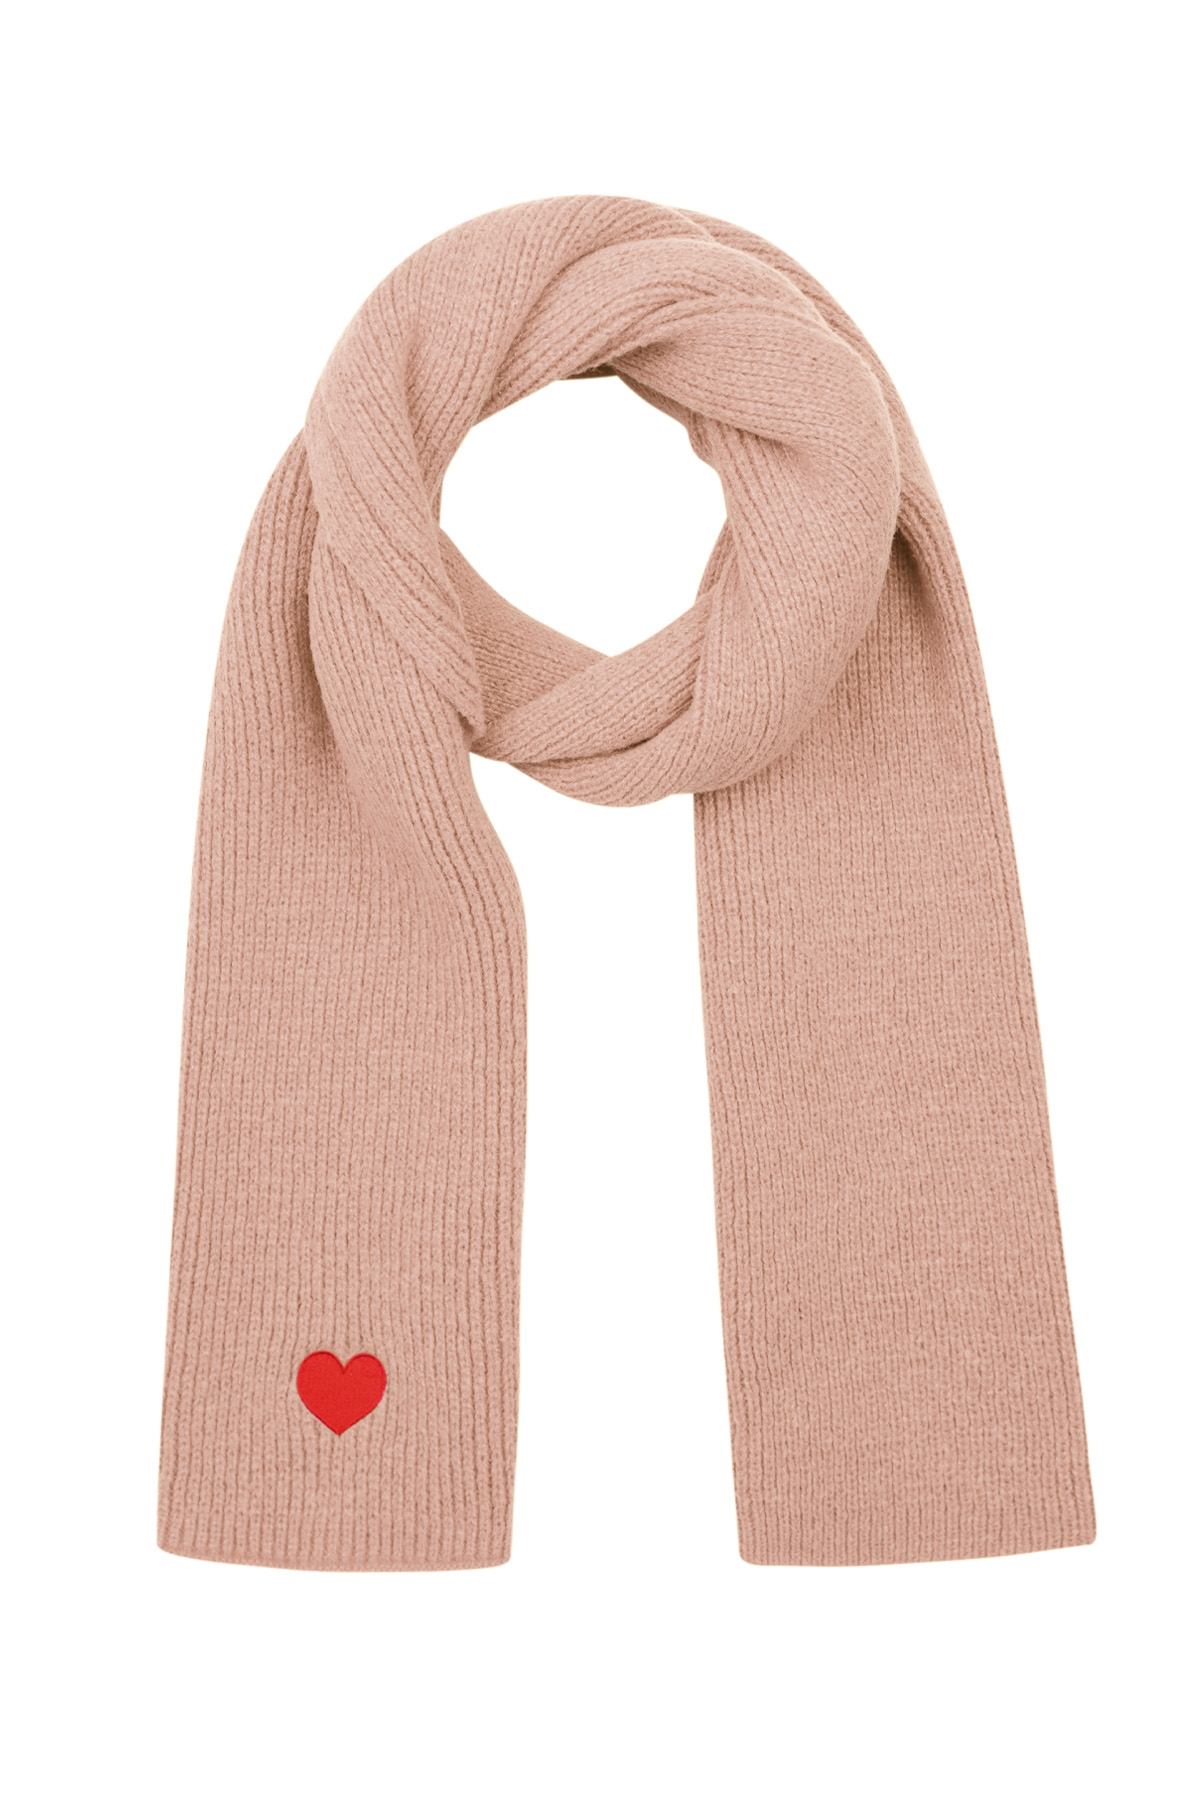 Winter scarf with heart detail - pink